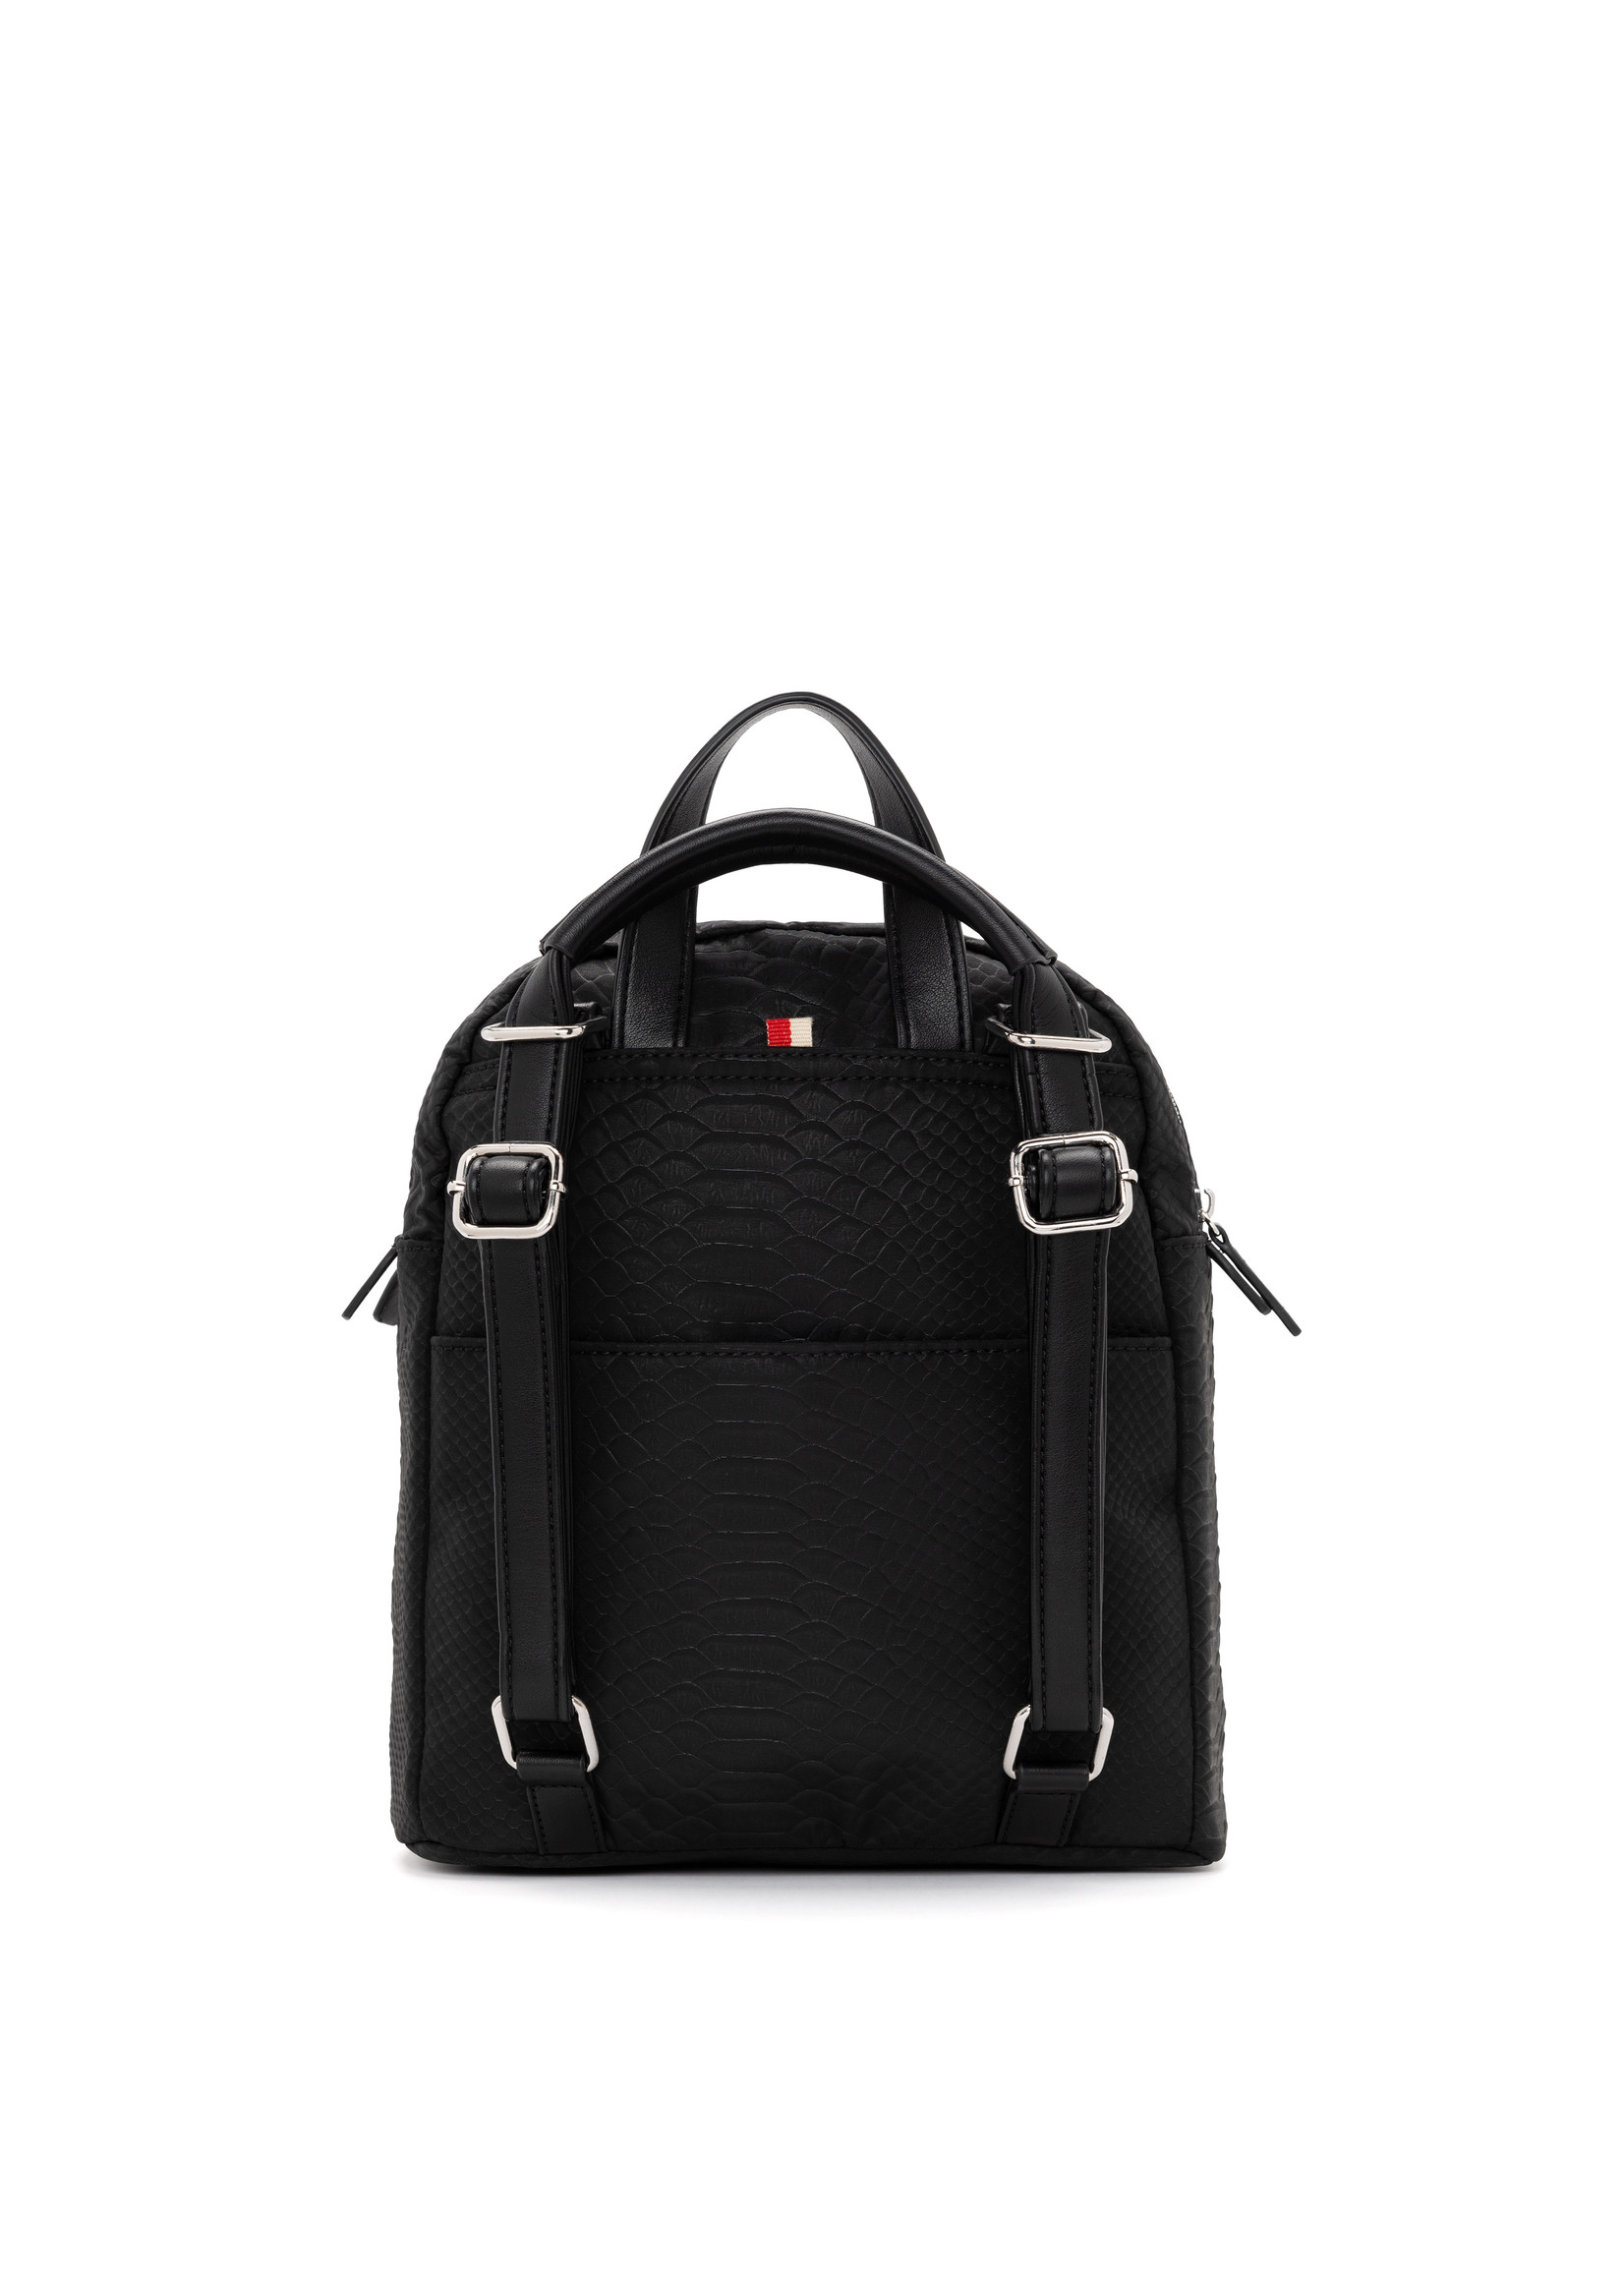 Co Lab Wave Convertible Backpack